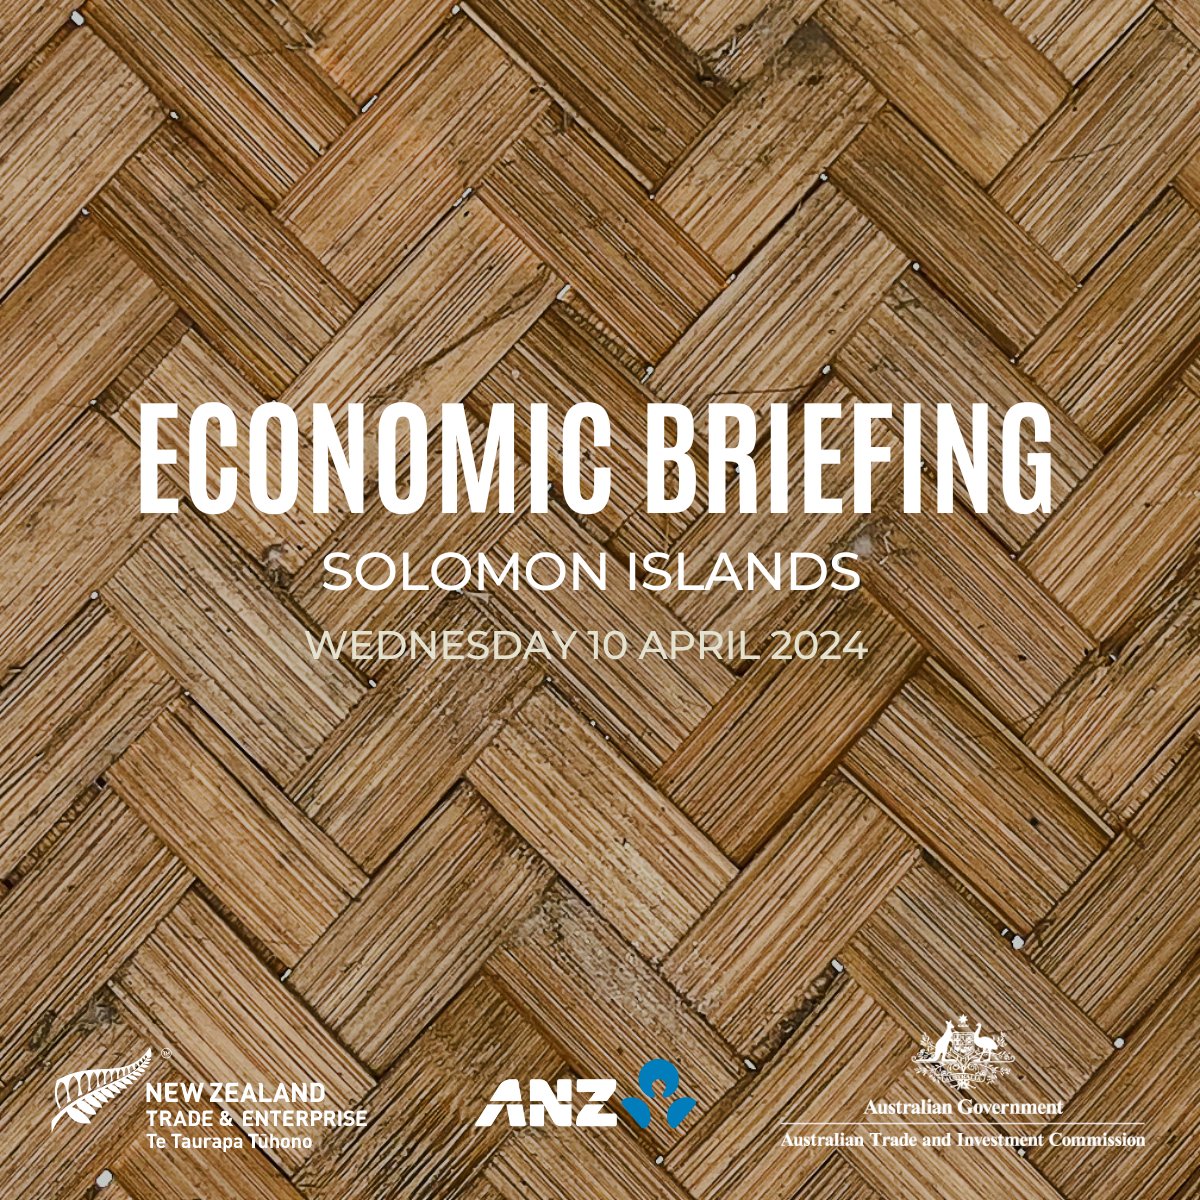 Join us for a discussion on the economic situation & outlook for the Solomon Islands, and the ongoing trade & supply issues facing the country. This briefing is open to any businesses operating in, or interested in, the Solomon Islands. Register here: bit.ly/4aa0bAJ